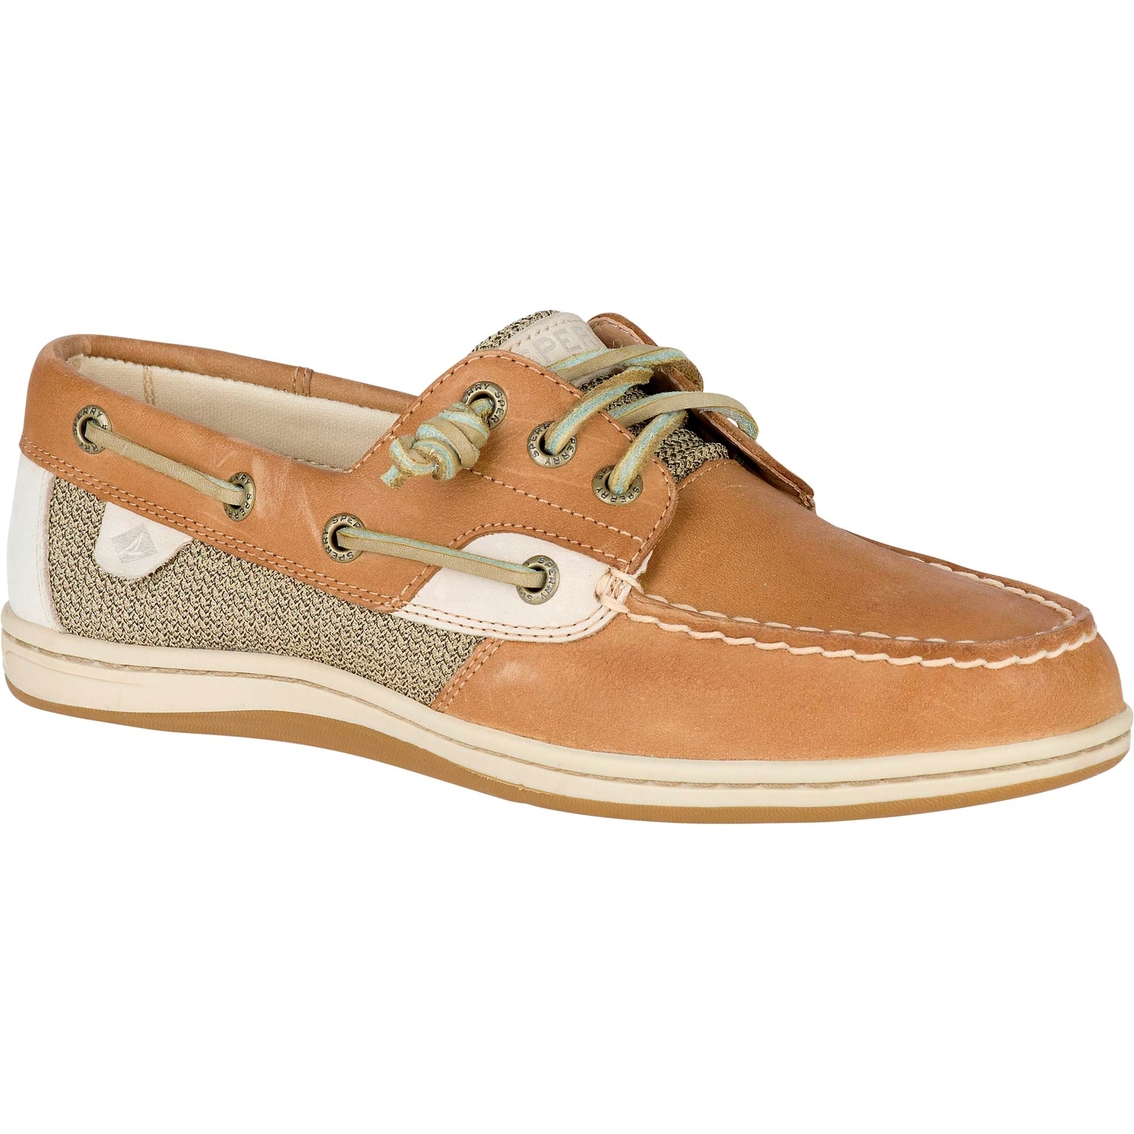 Sperry Women's Songfish Boat Shoes | Flats | Shoes | Shop The Exchange